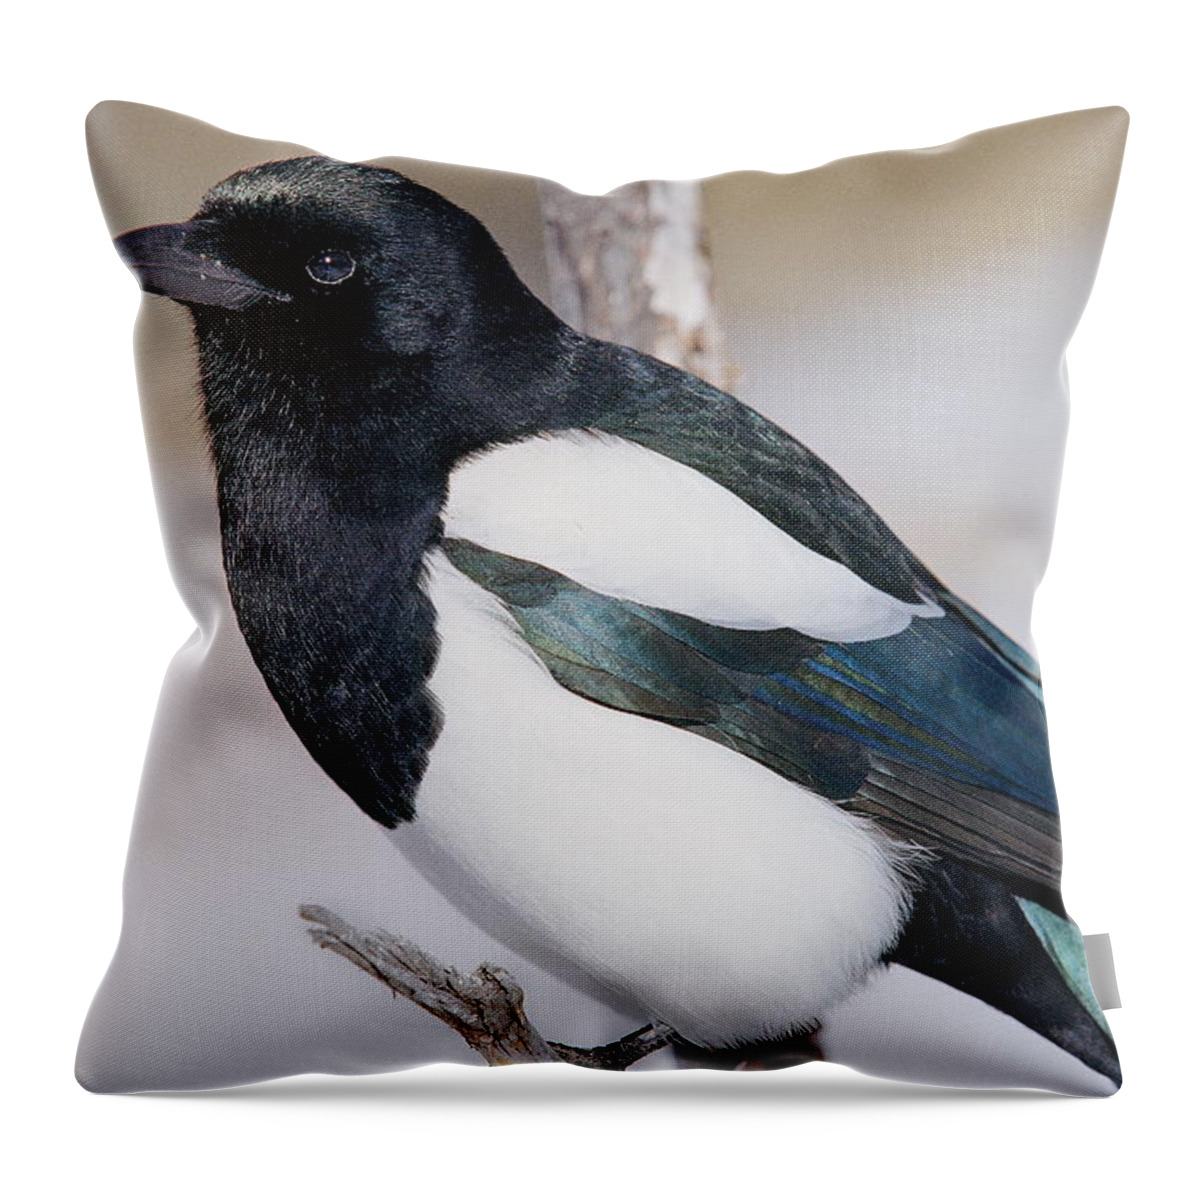 Bird Throw Pillow featuring the photograph Black-billed Magpie by Eric Glaser